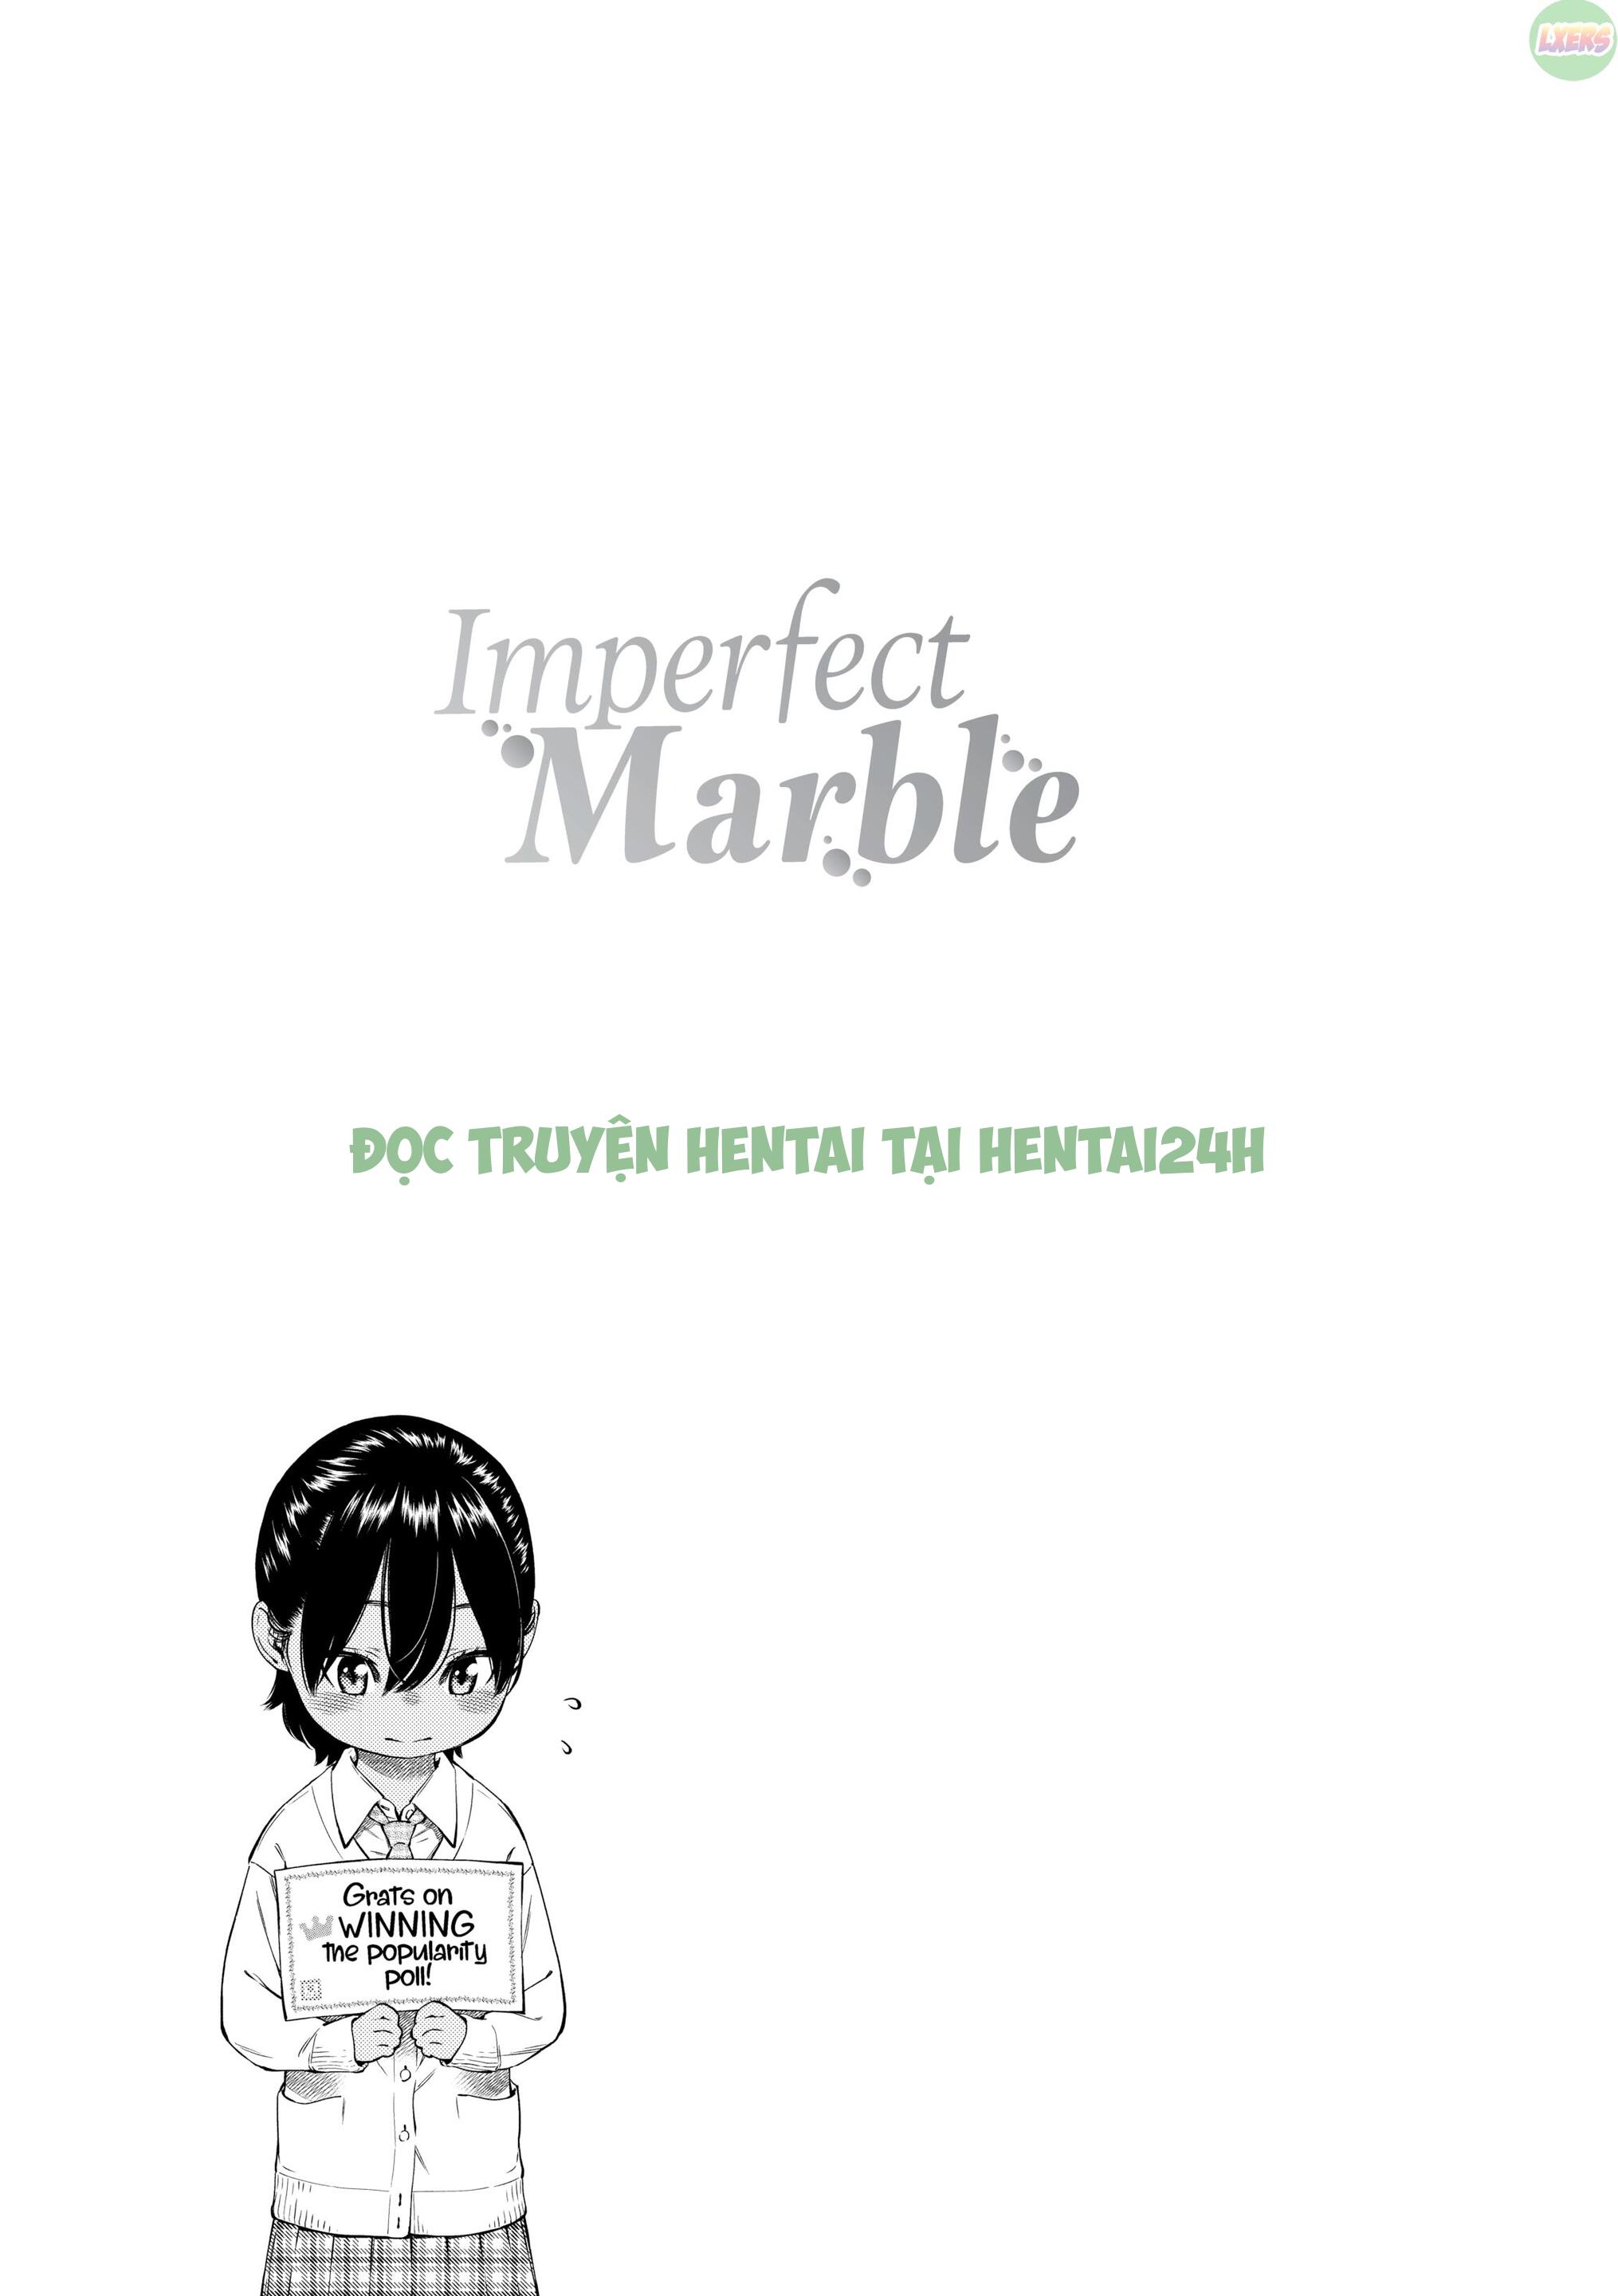 Xem ảnh Imperfect Marble - Chapter 5 - 35 - Hentai24h.Tv